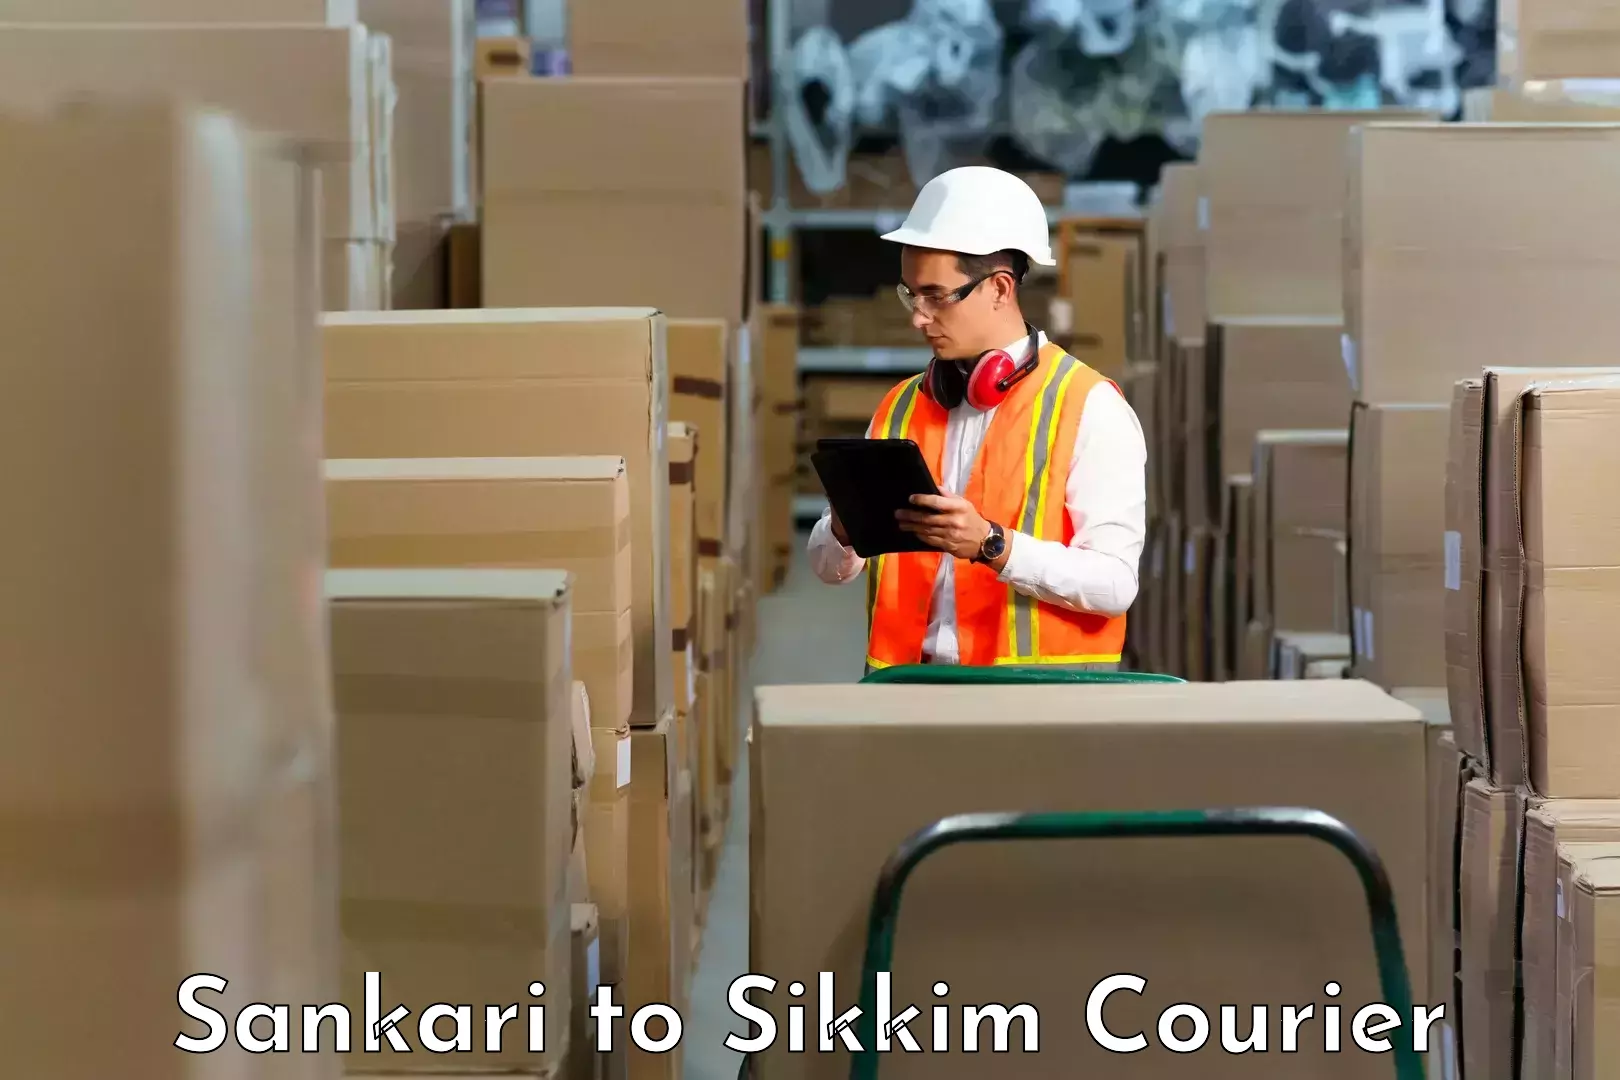 Subscription-based courier Sankari to Pelling